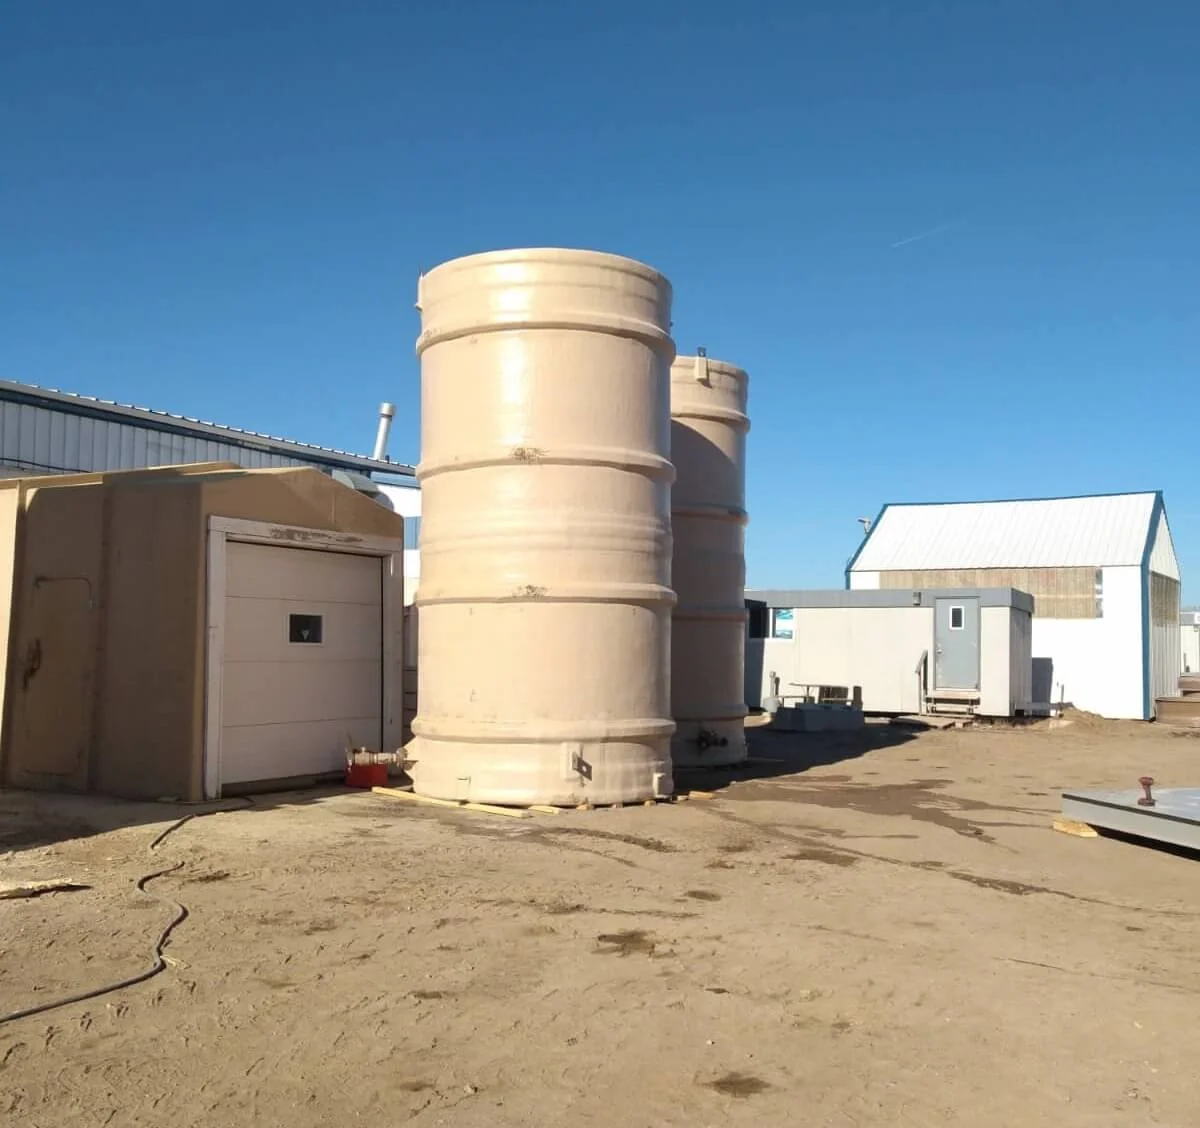 Fiberglass Storage Tanks for Industrial and Chemical Storage